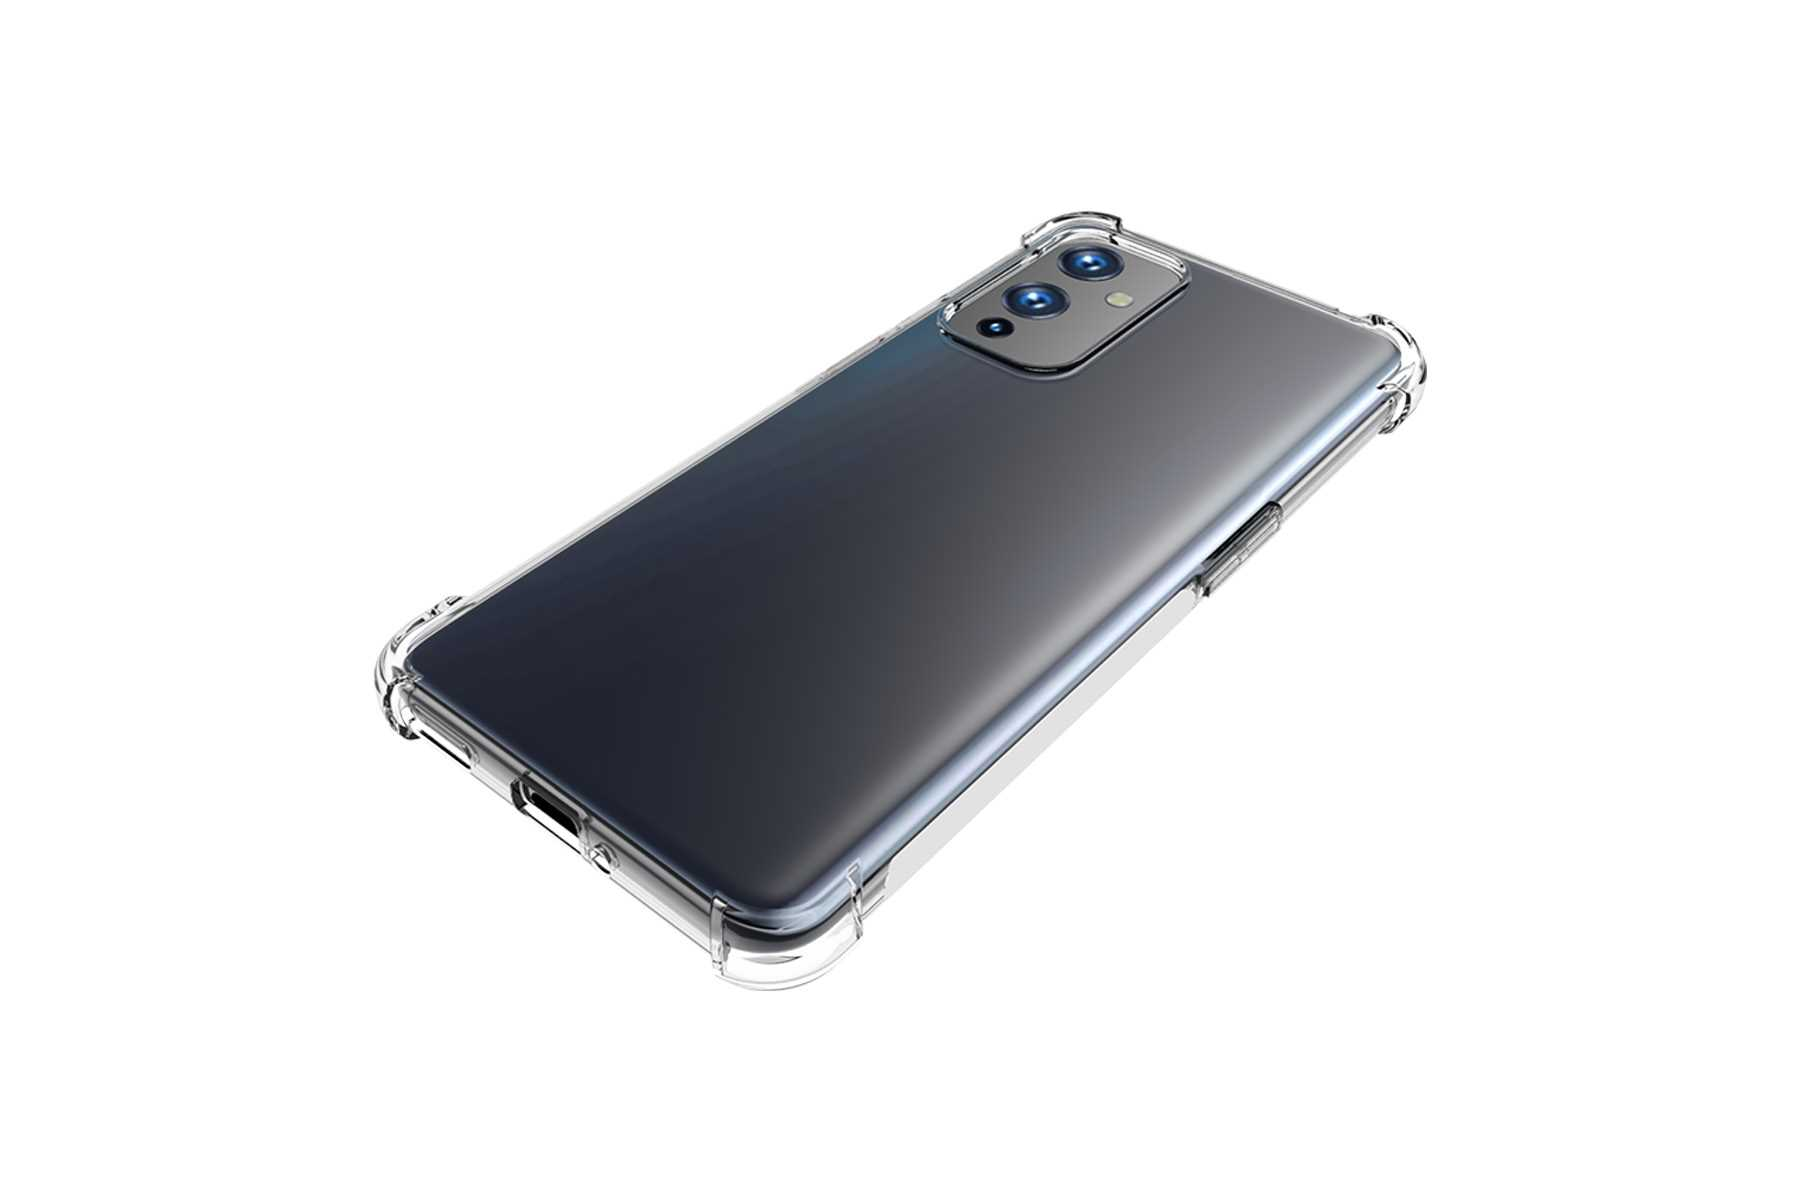 MORE OnePlus, Backcover, 9, Clear ENERGY MTB Transparent Case, Armor